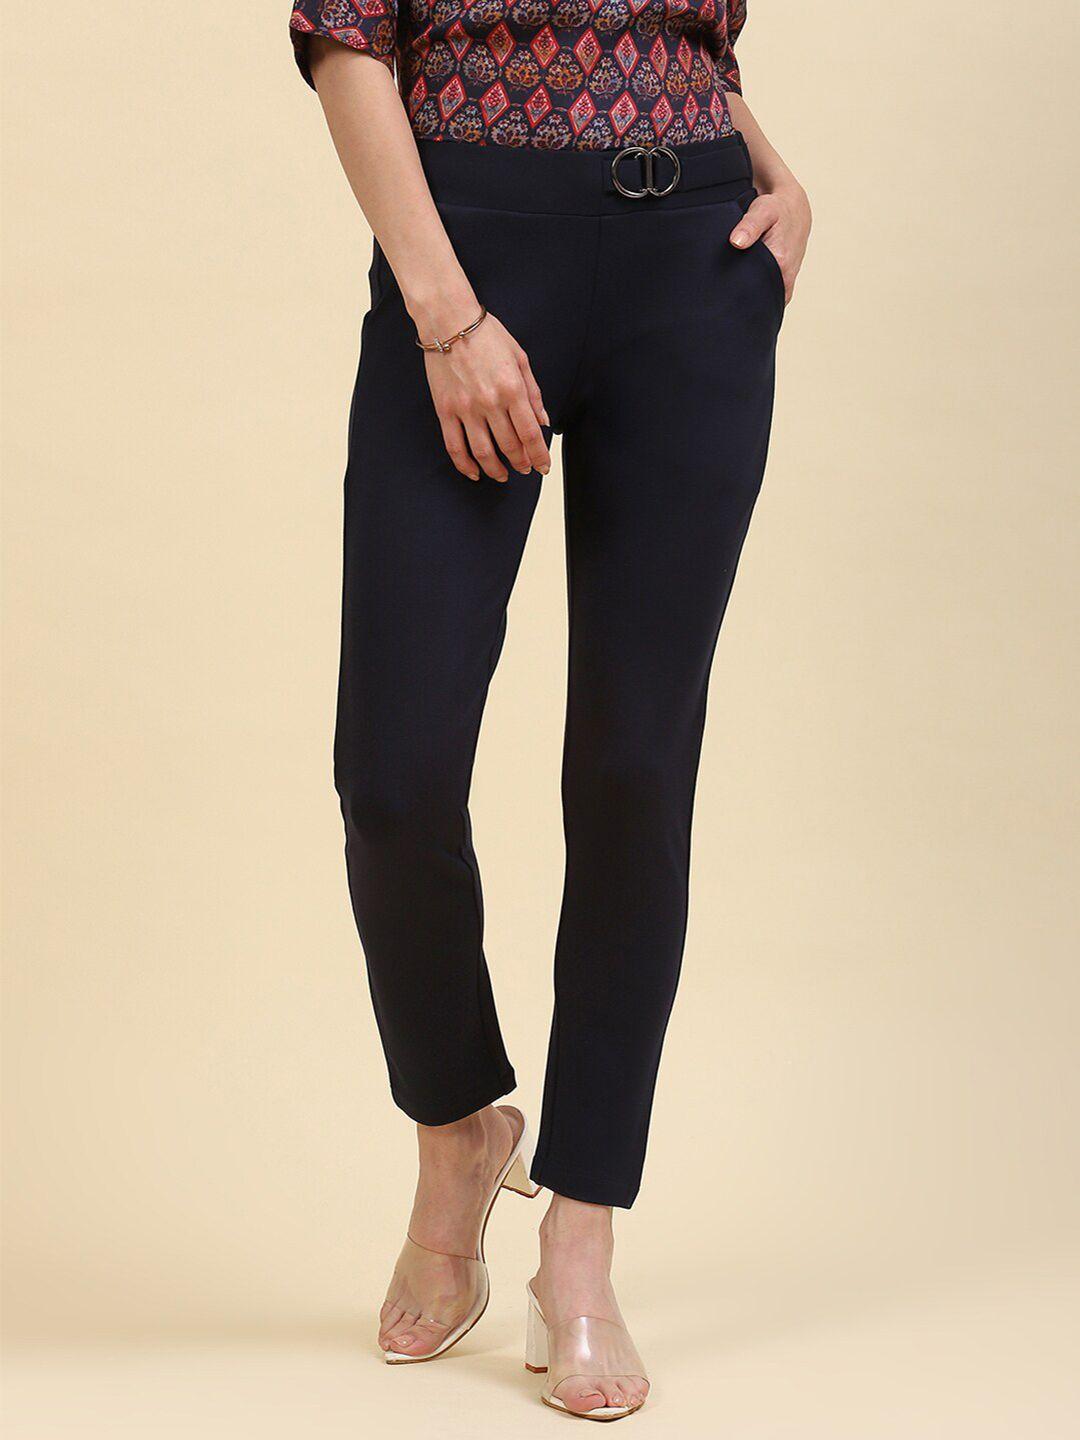 monte-carlo-women-mid-rise-casual-jeggings